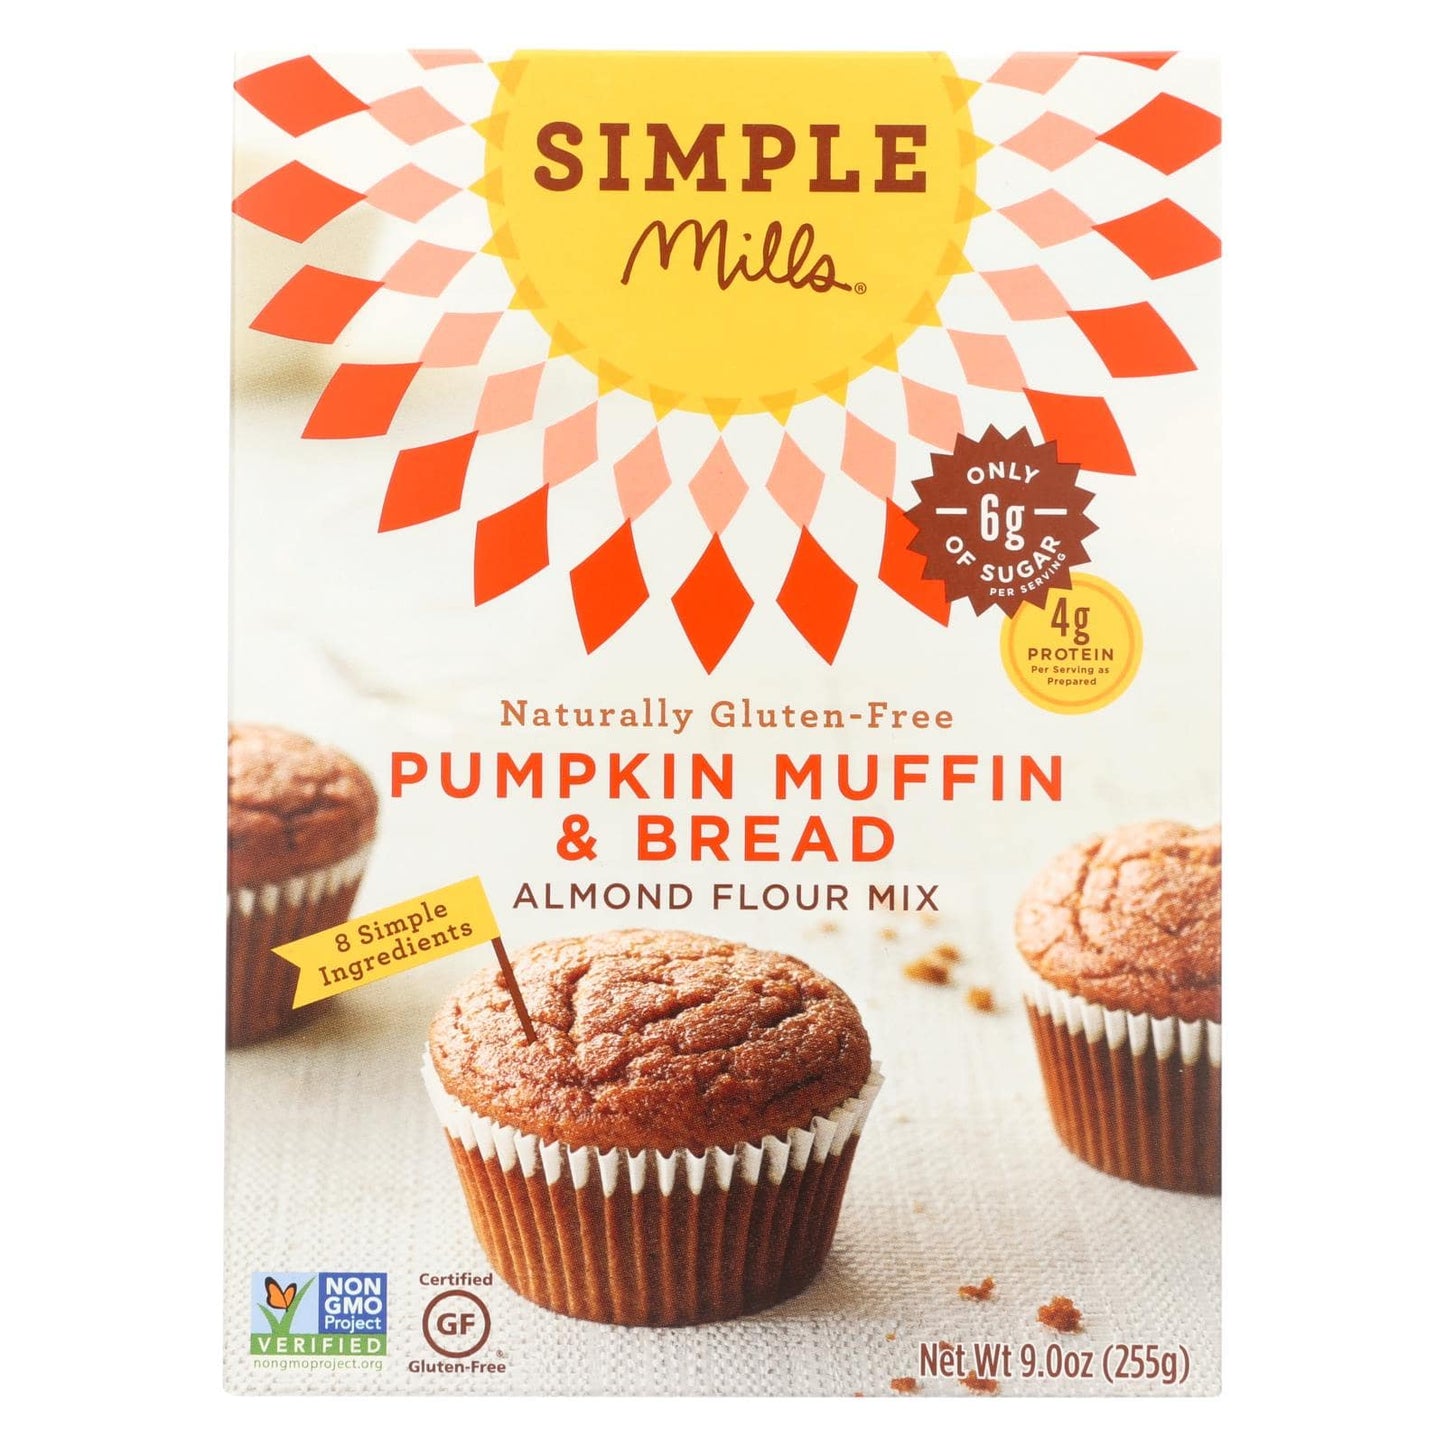 Buy Simple Mills Almond Flour Pumpkin Muffin And Bread Mix - Case Of 6 - 9 Oz.  at OnlyNaturals.us